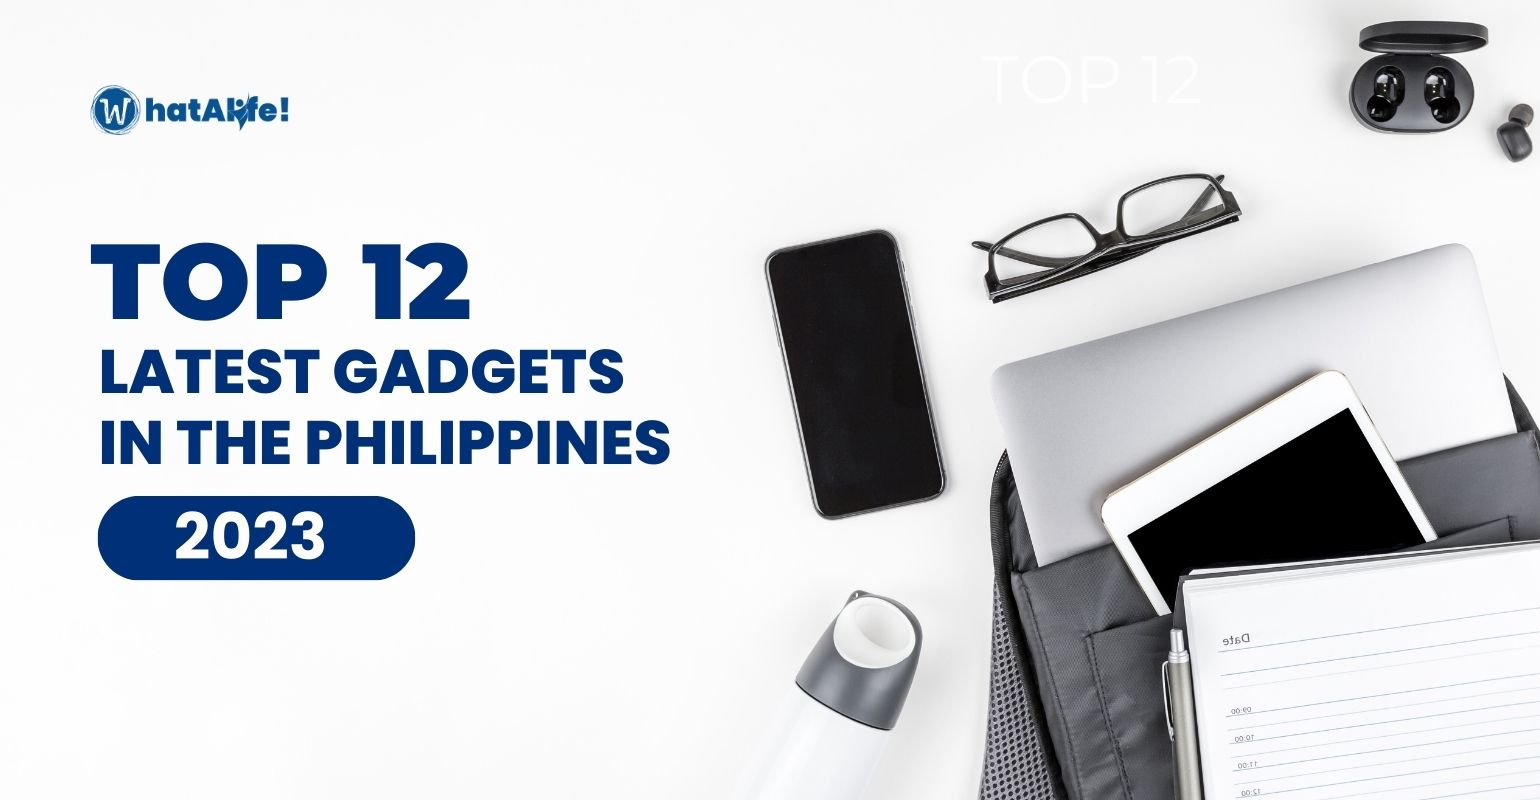 The Top 12 Latest Gadgets in the Philippines 2023